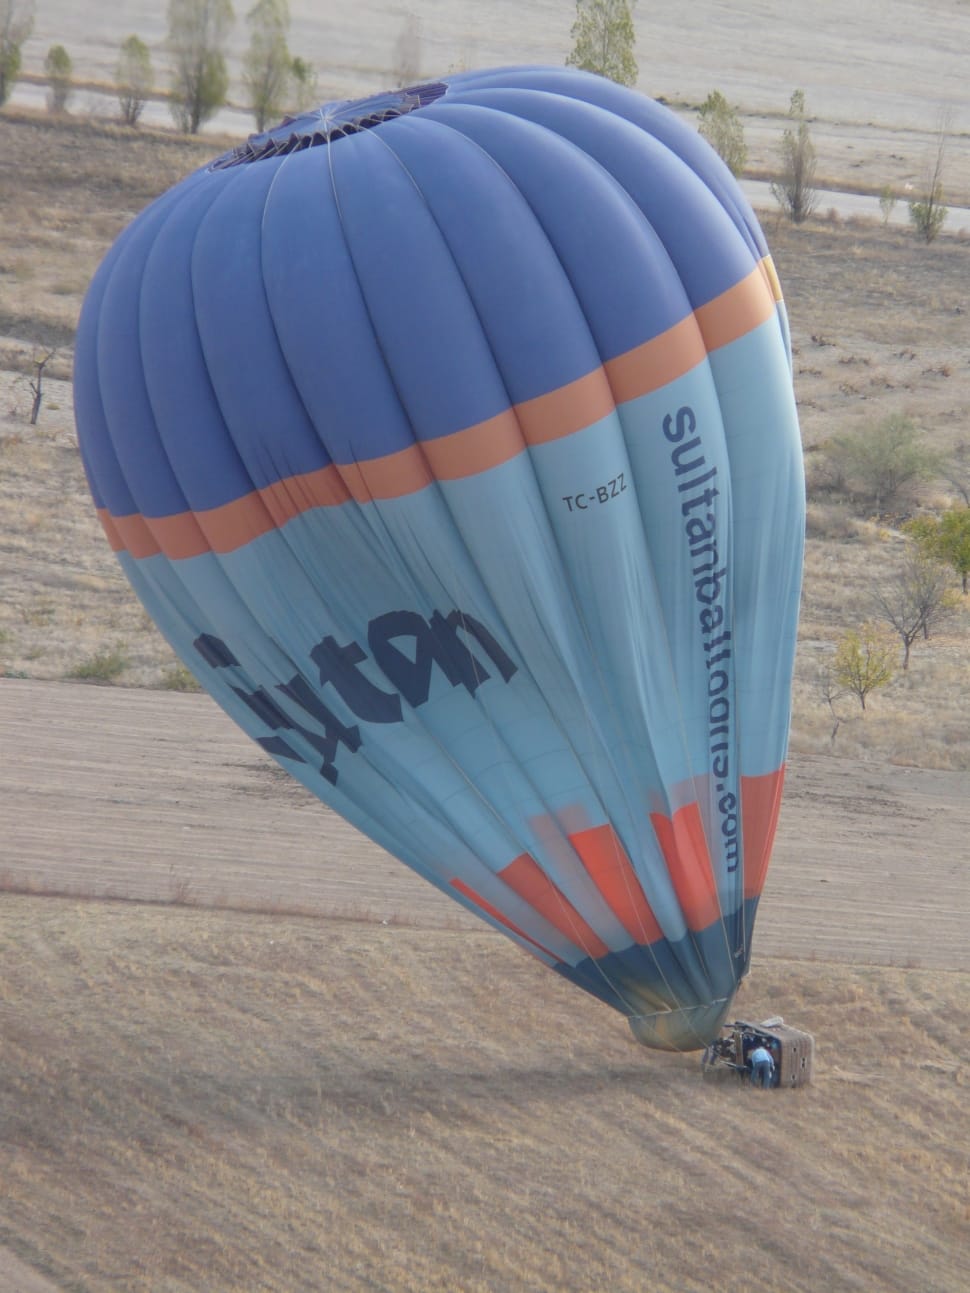 blue teal orange and red hot air balloon preview